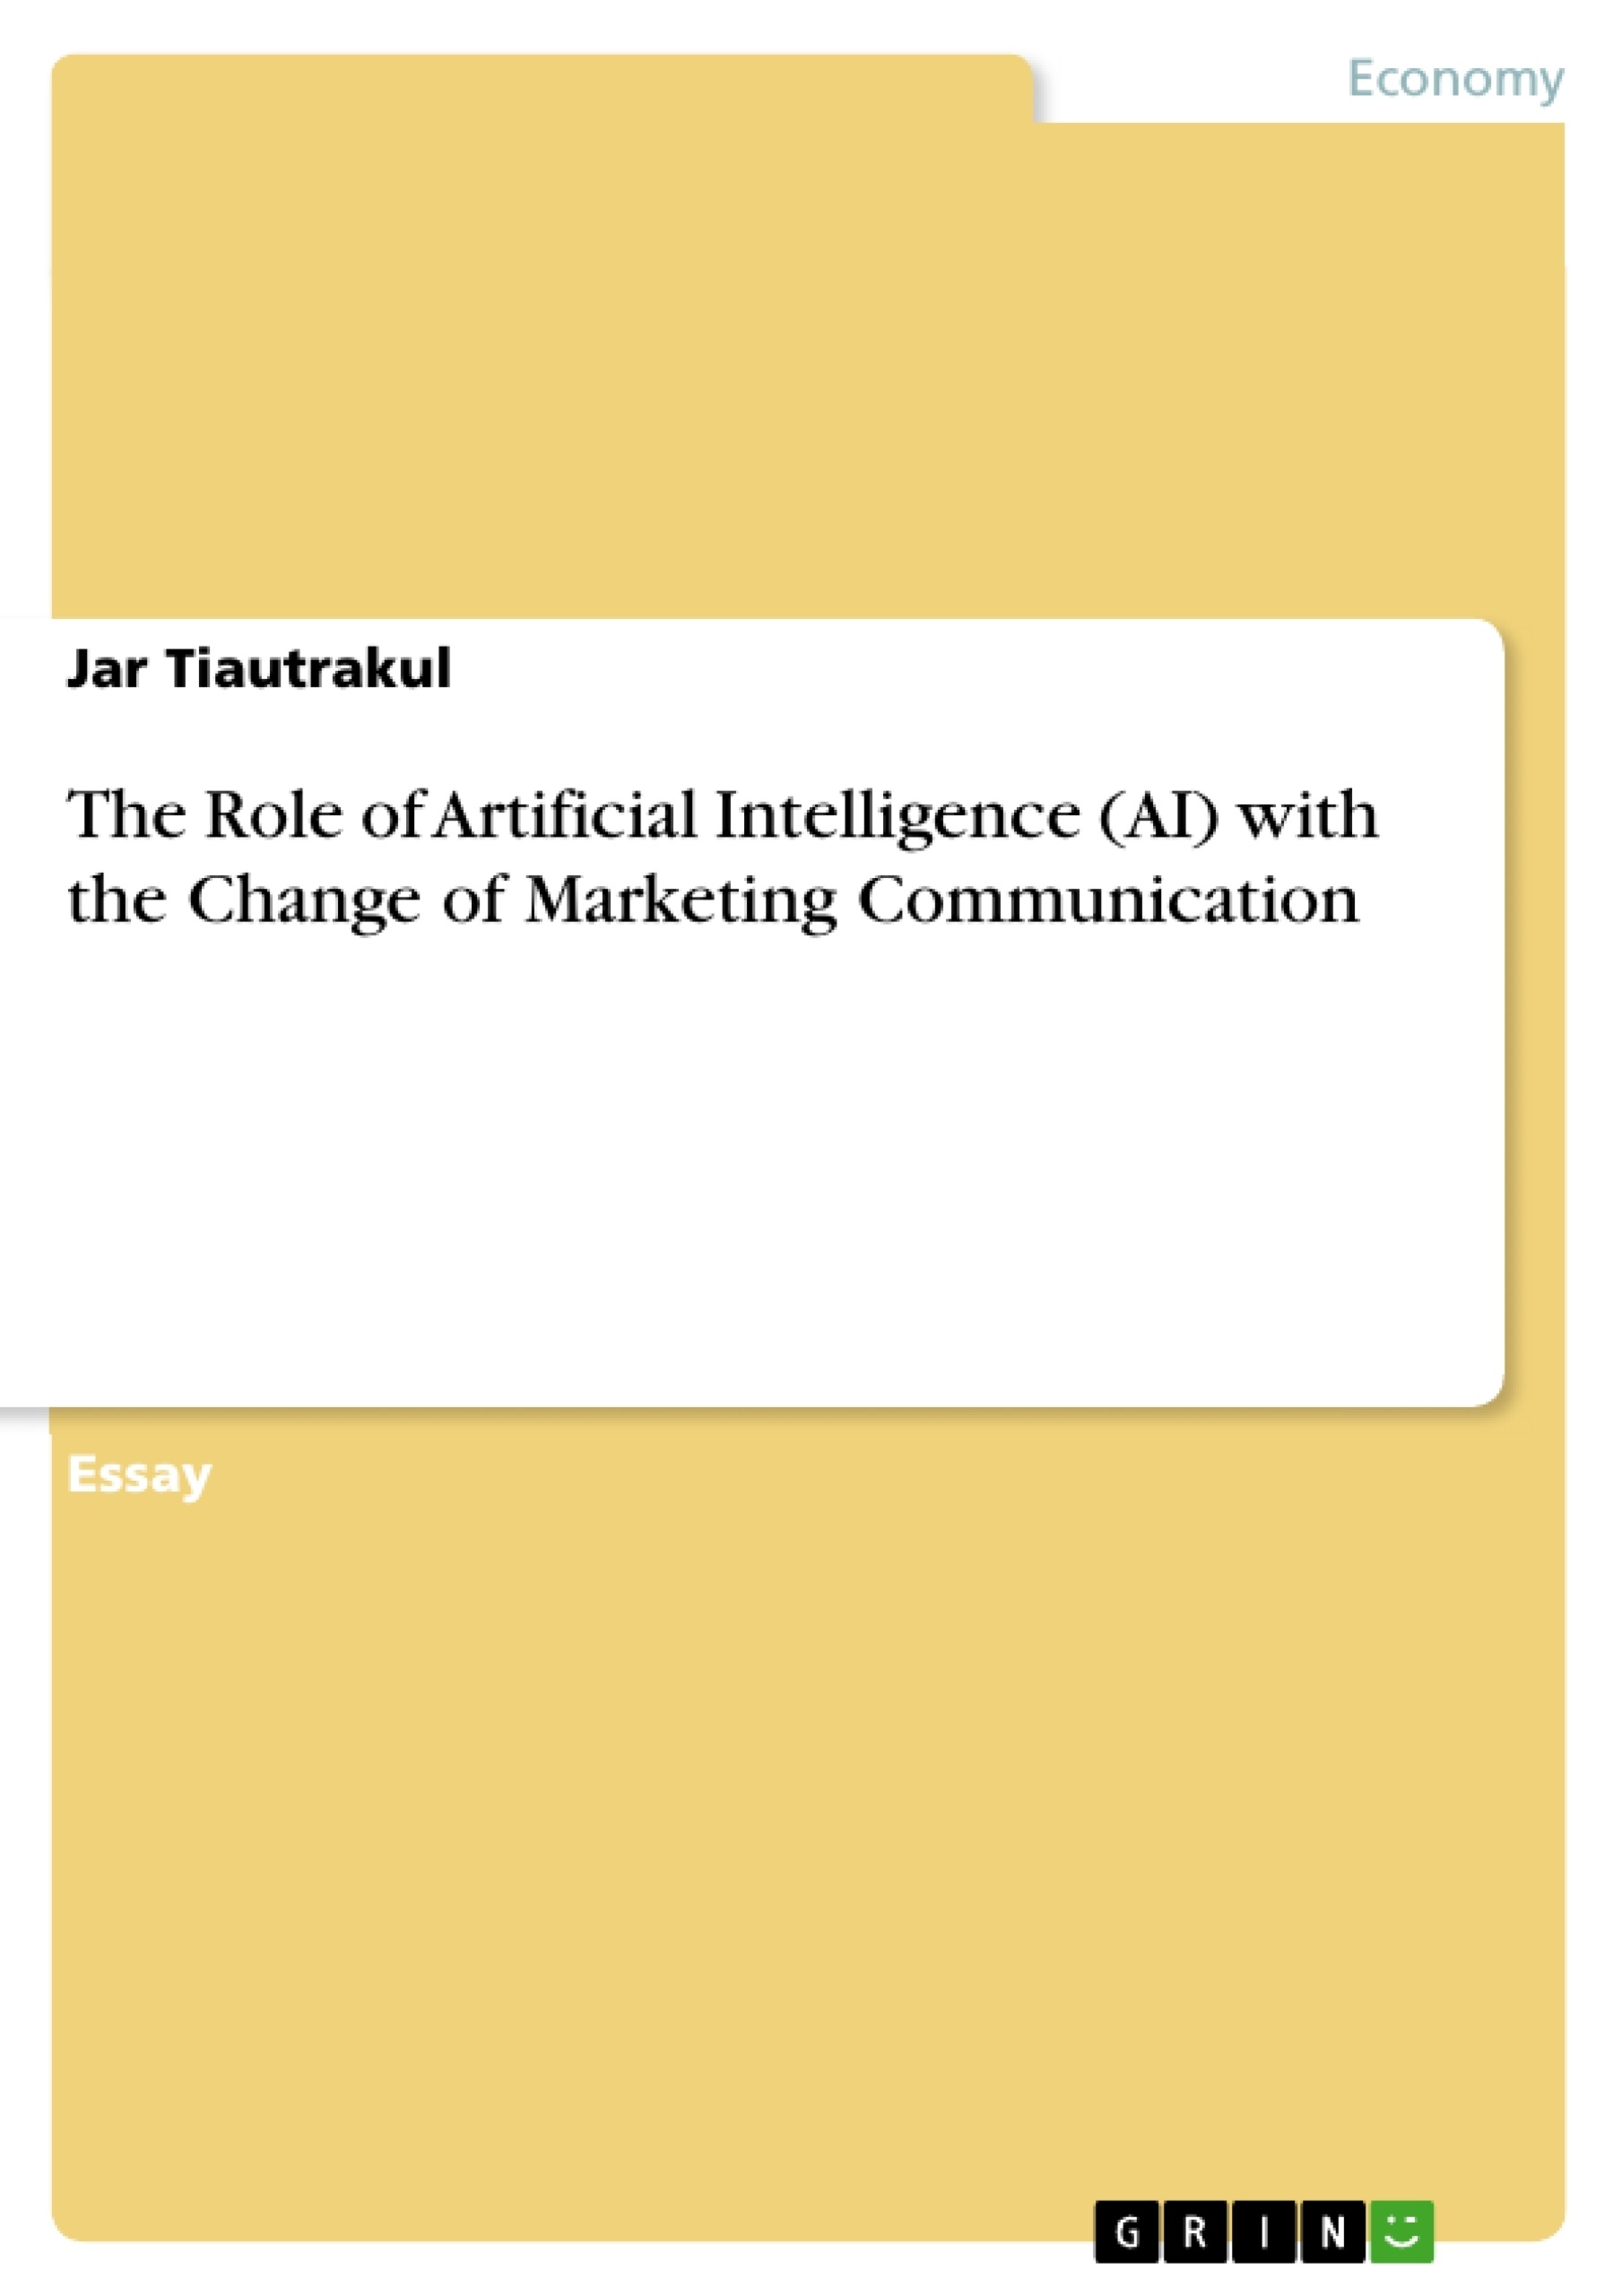 Title: The Role of Artificial Intelligence (AI) with the Change of Marketing Communication